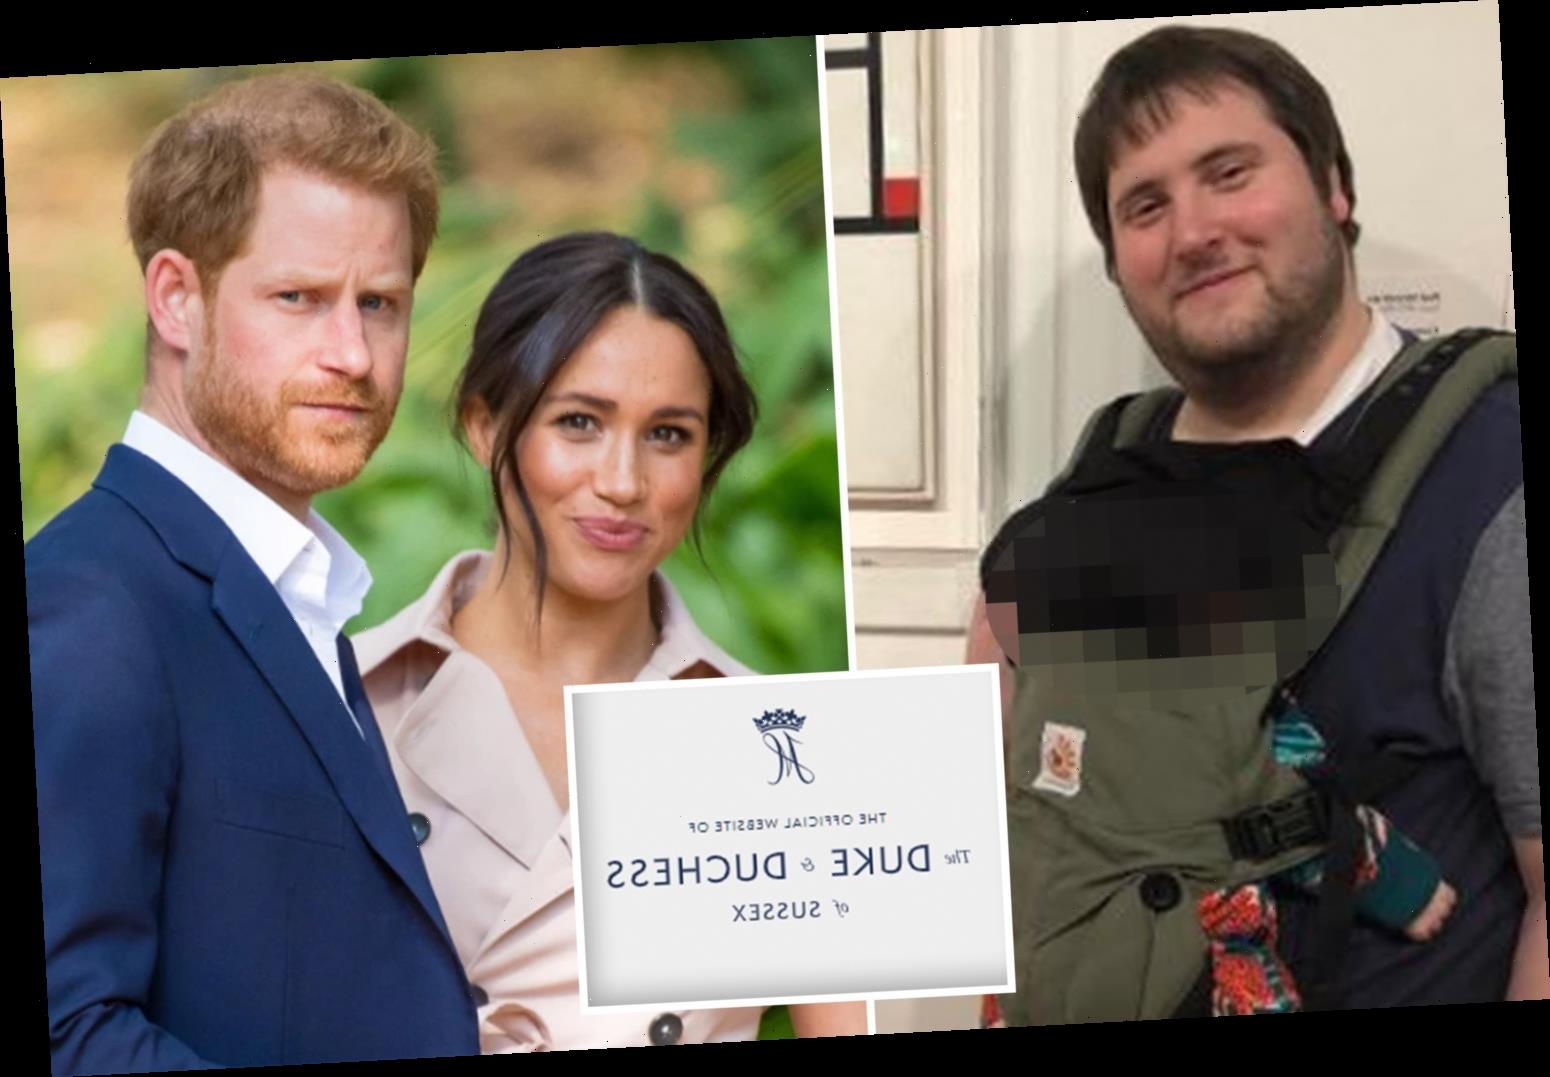 Prince Harry and Meghan Markle's attempt to trademark their Sussex Royal brand is blocked after legal complaint from Australian doctor